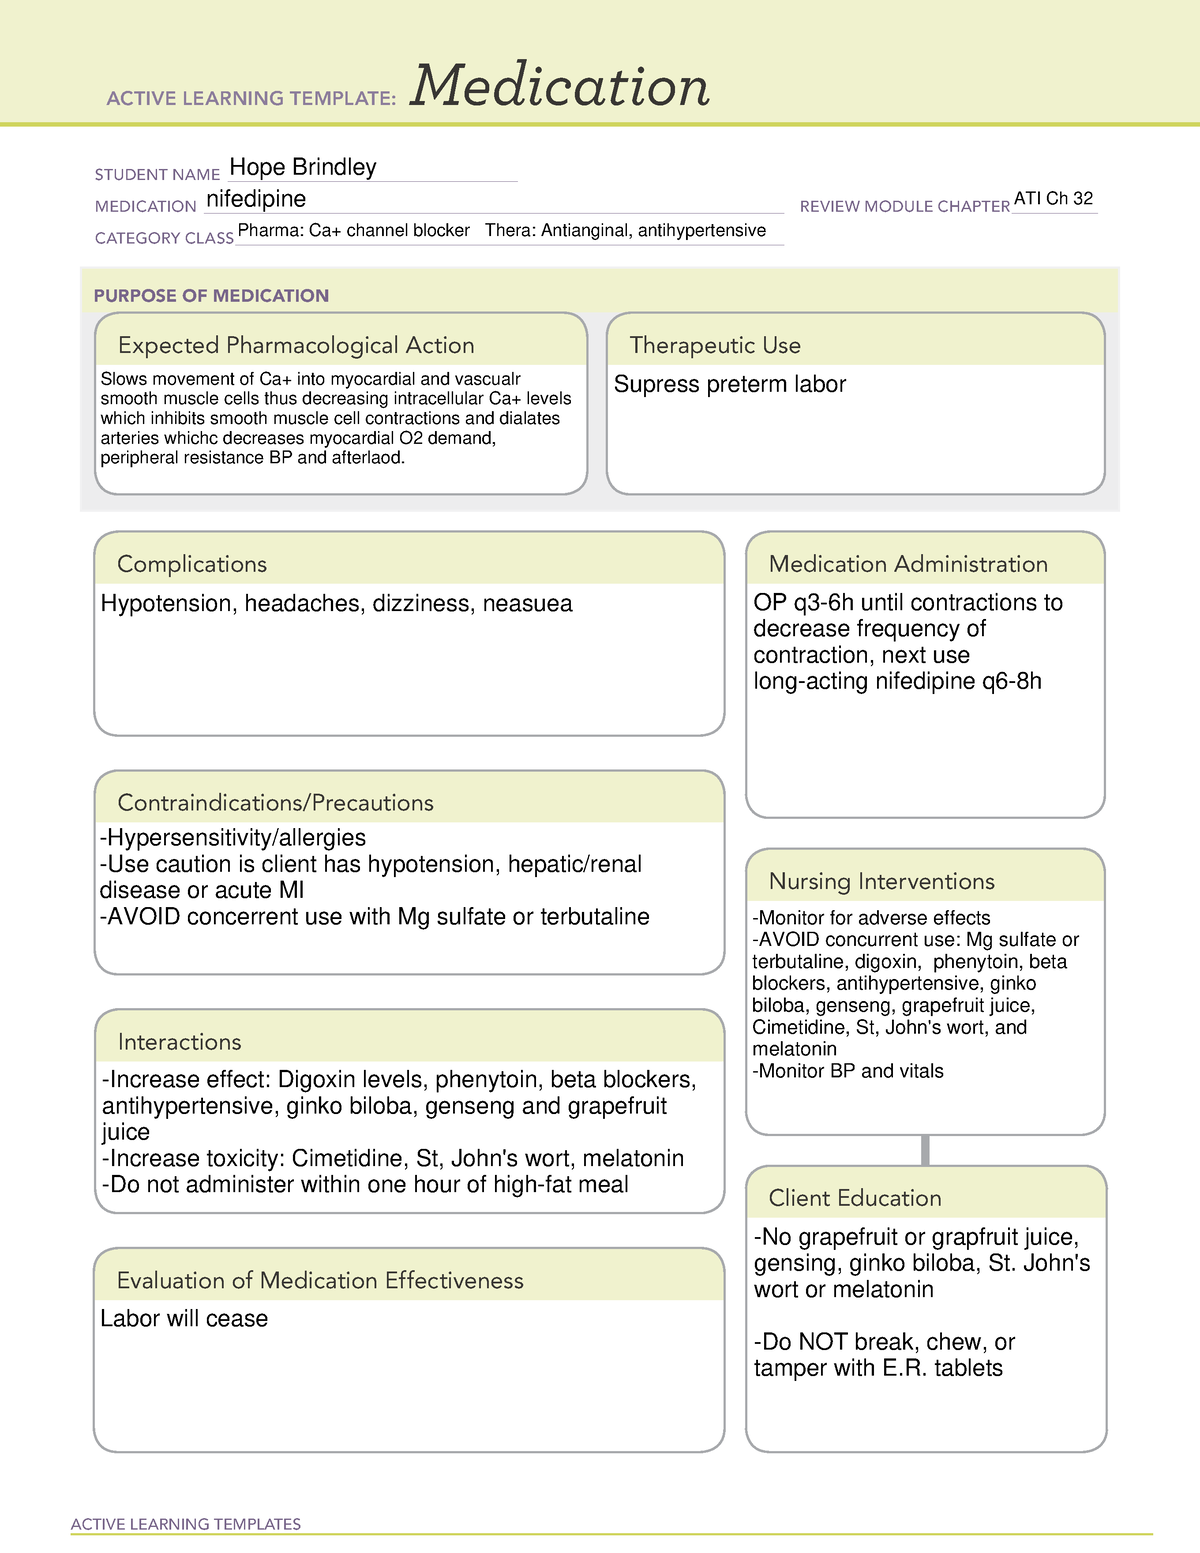 Nifedipine - ACTIVE LEARNING TEMPLATES Medication STUDENT NAME